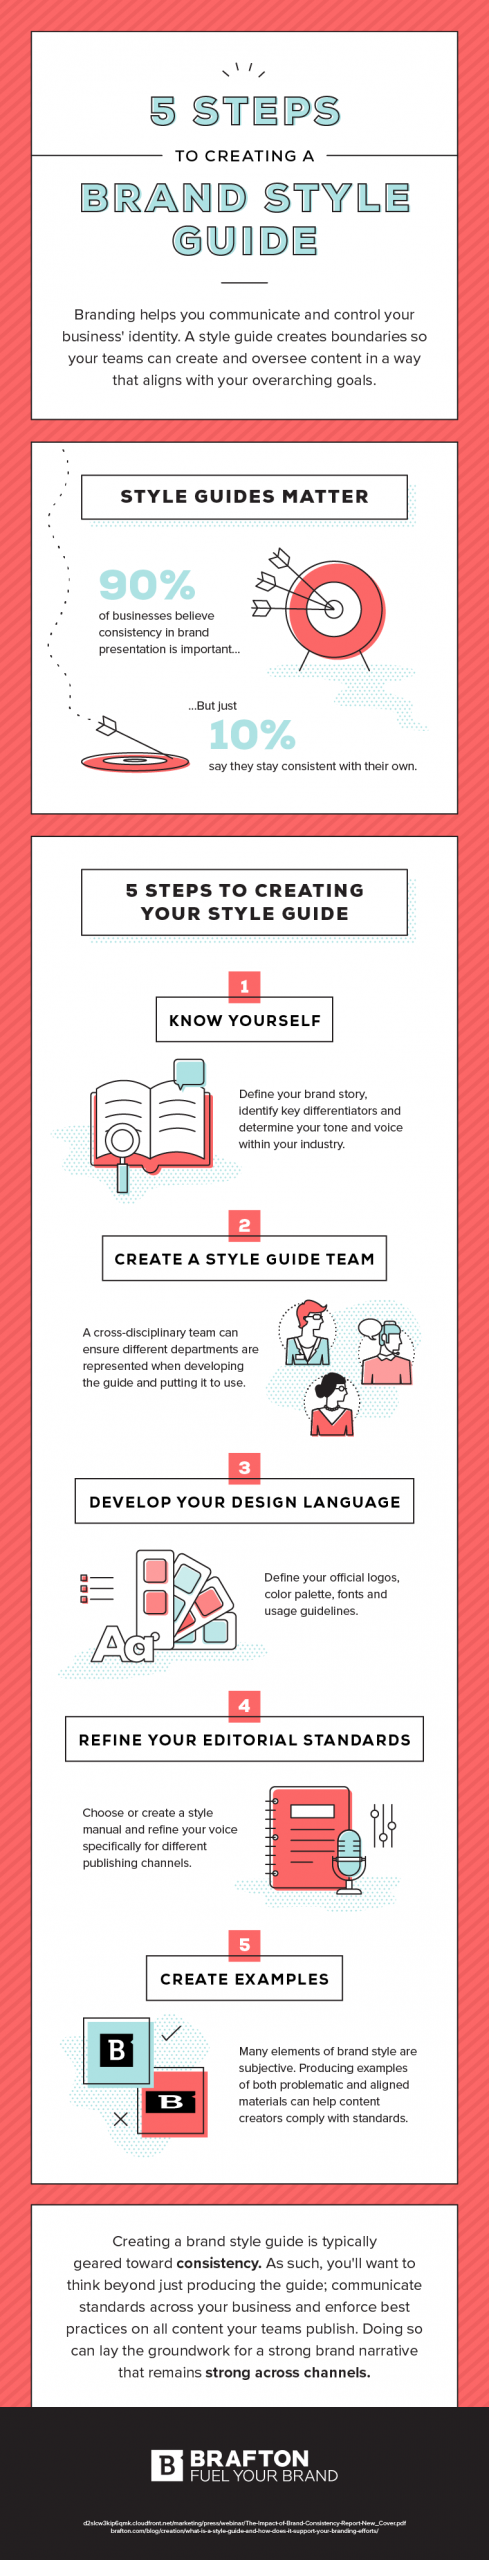 5 steps to creating a brand style guide infographic